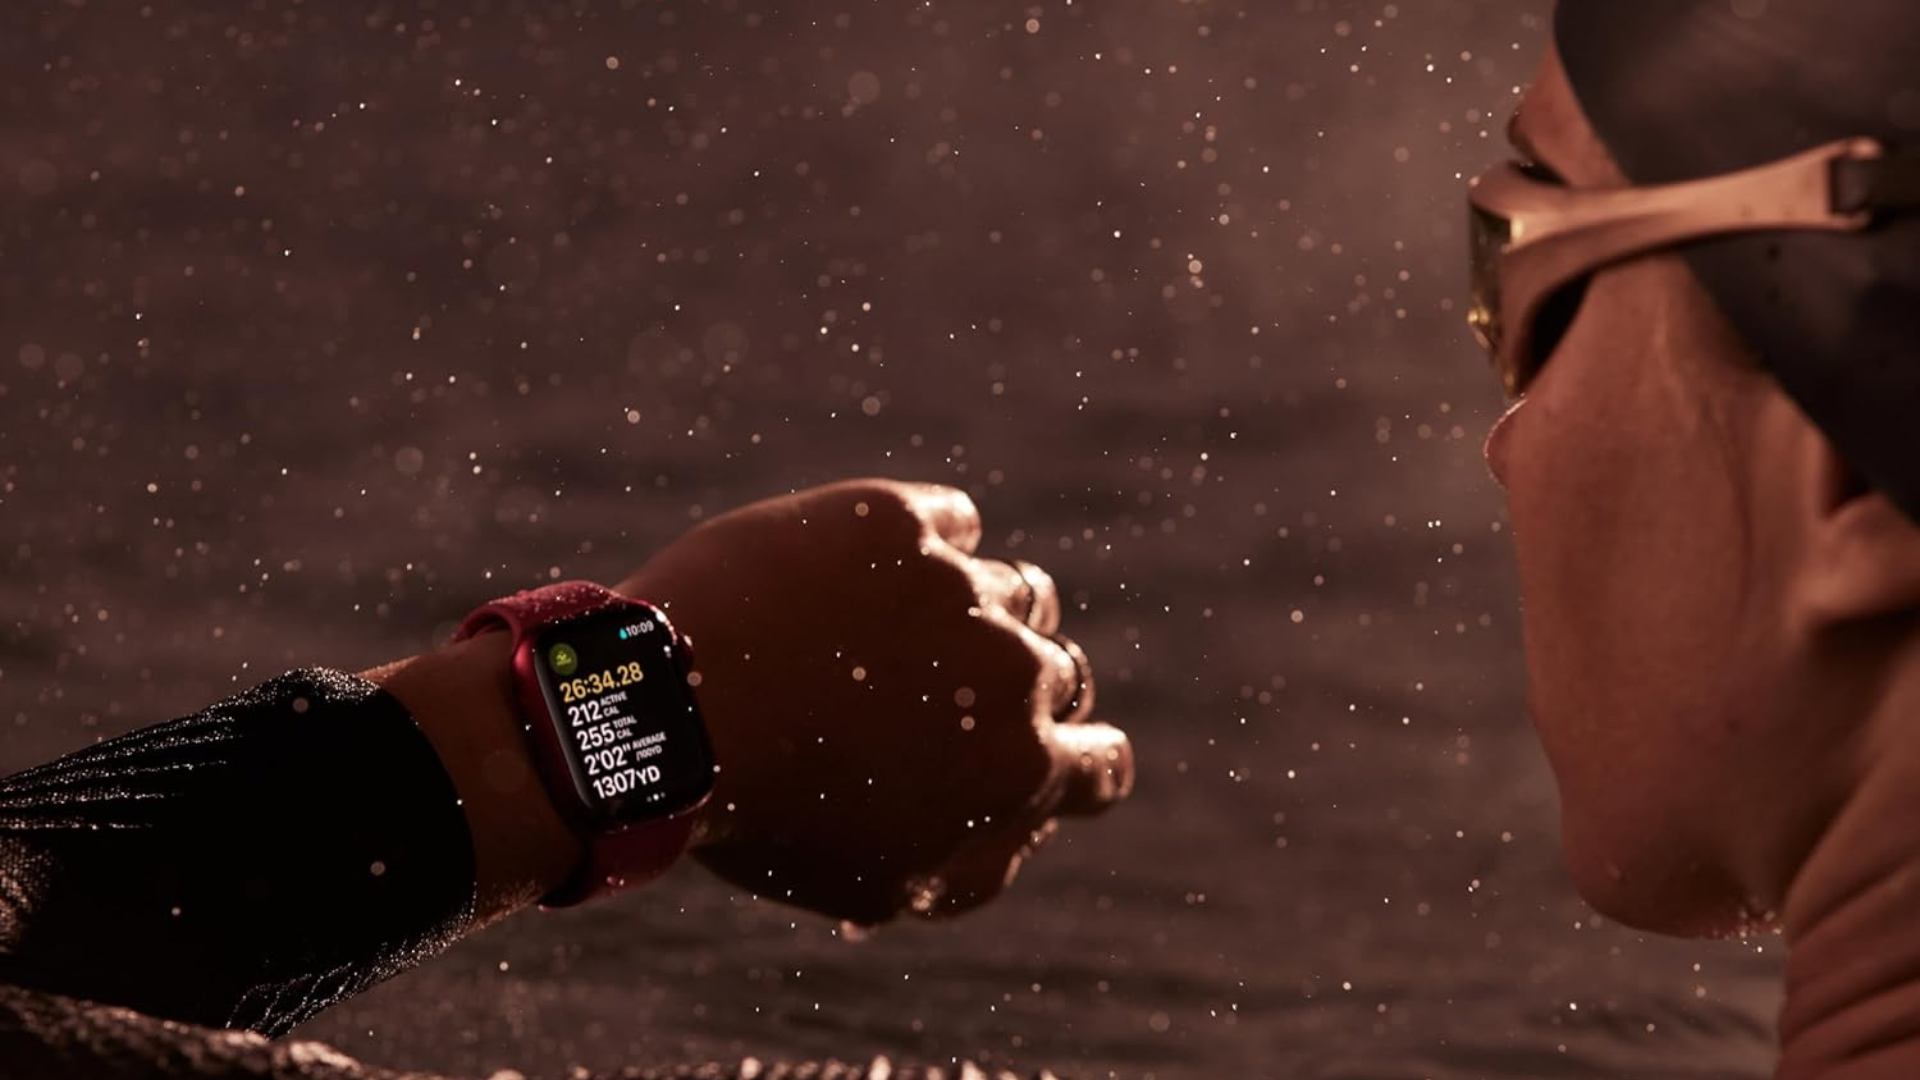 A swimmer looking at their Apple Watch while in the water